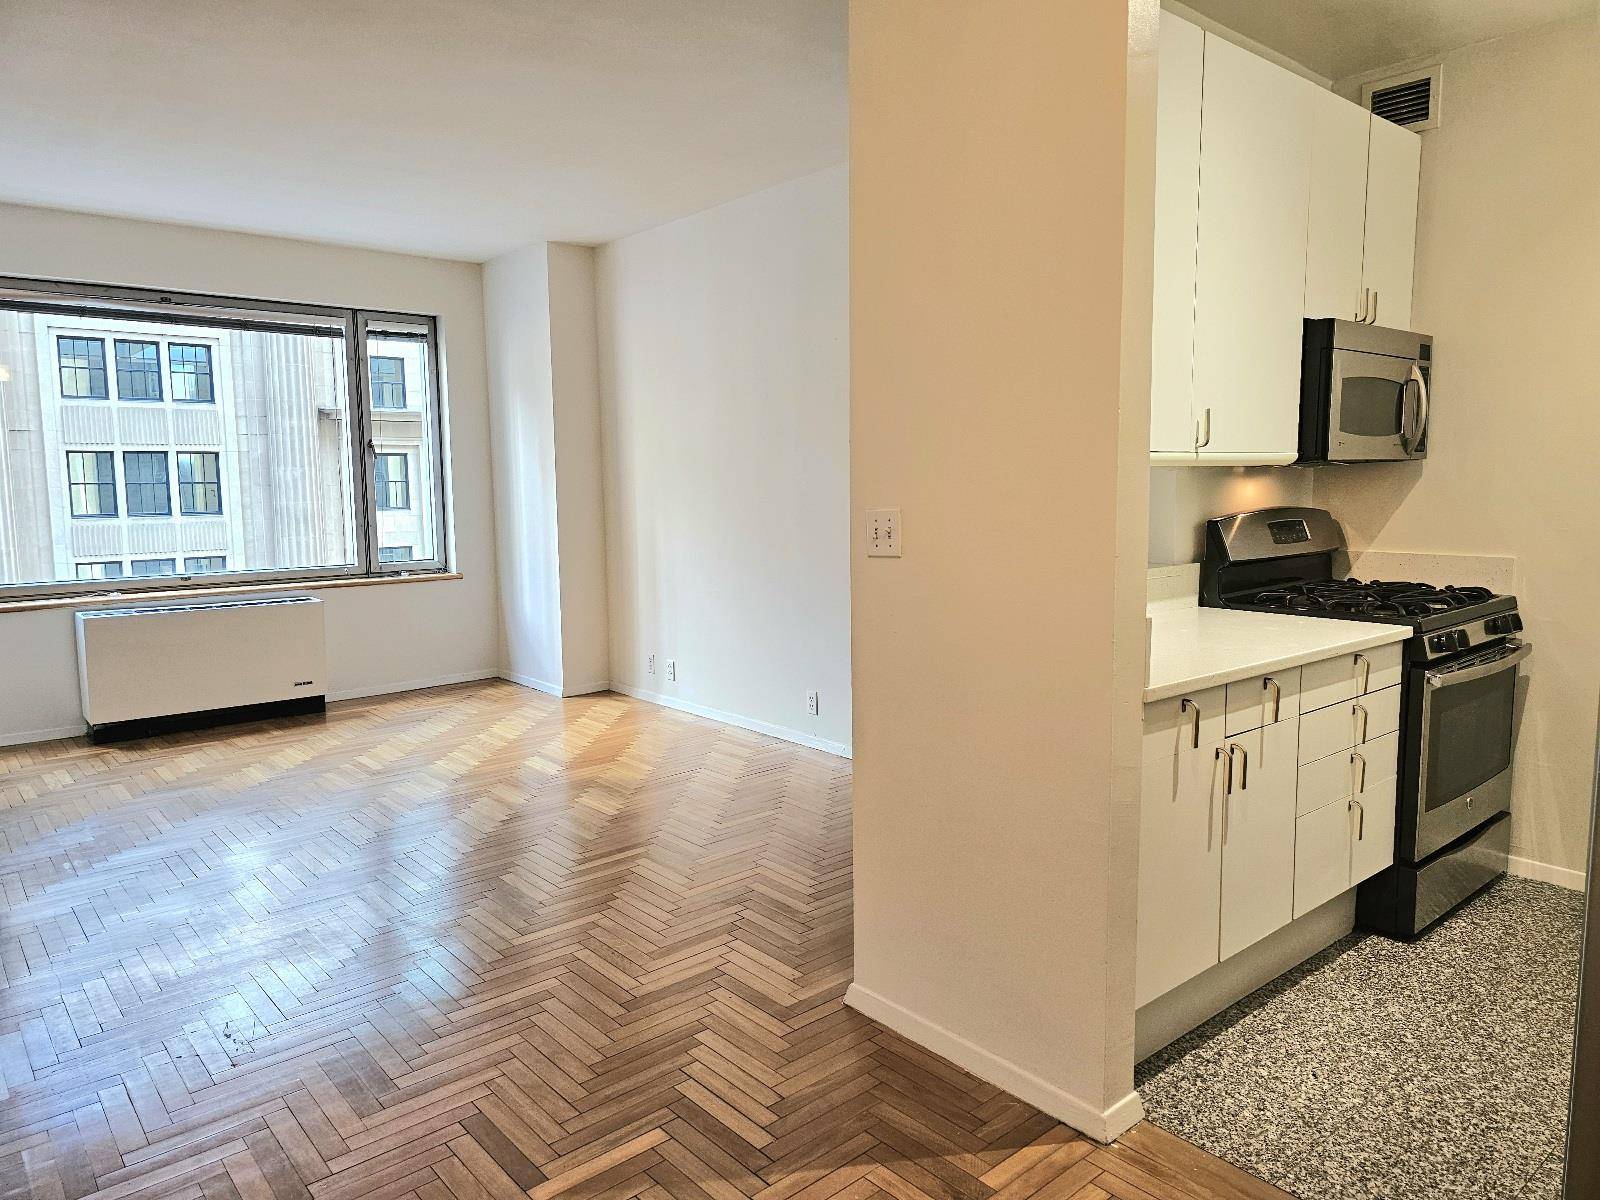 THE APARTMENT Located in the heart of Columbus Circle in the highly desirable Central Park Place Condominium is this very nice 567 square foot, 1 bedroom home.